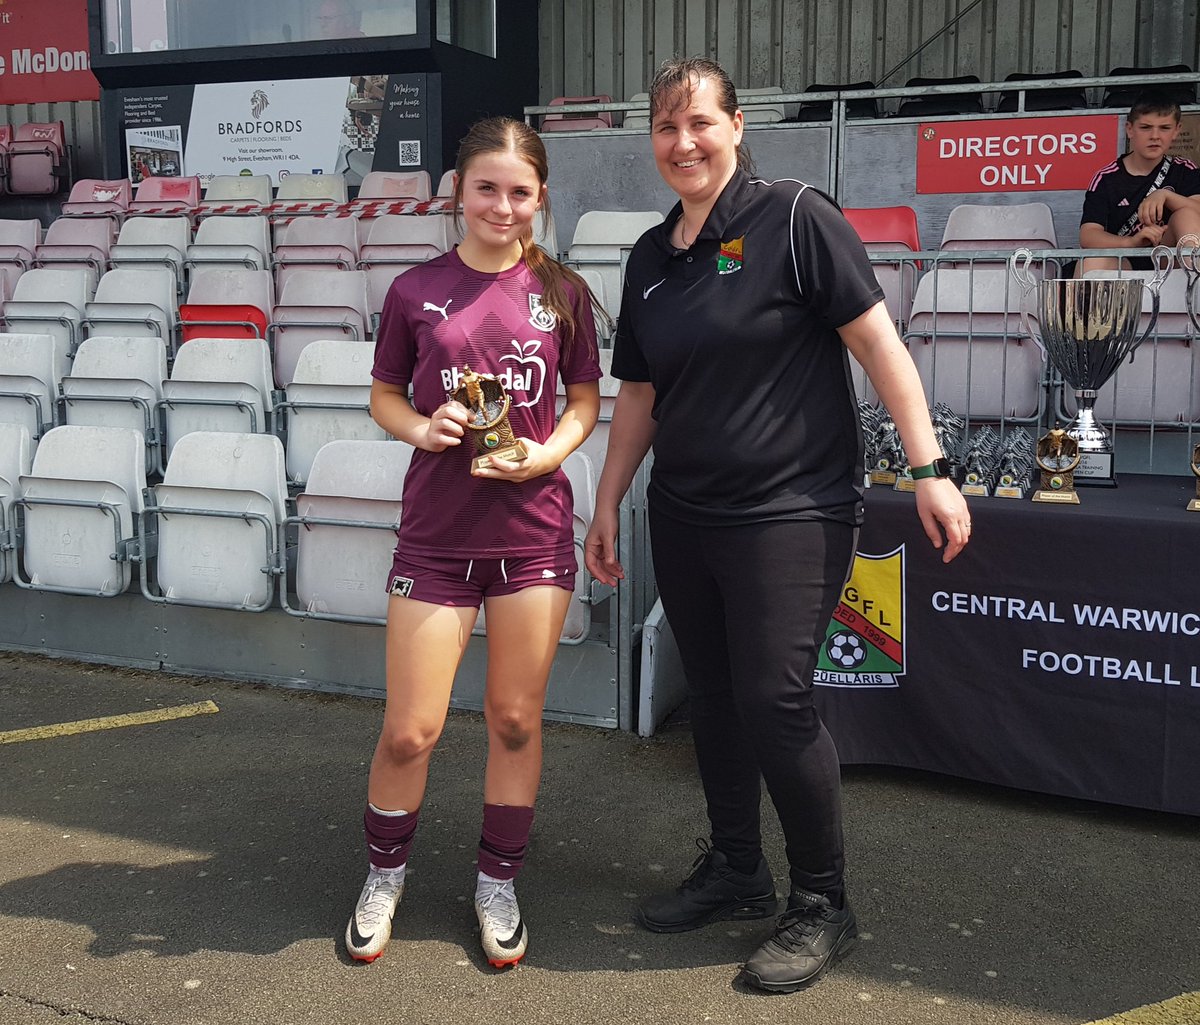 Congratulations to Darcy who was selected as Stourbridge's Player of the Match. 💪👏 #Glassgirls 🔴⚪